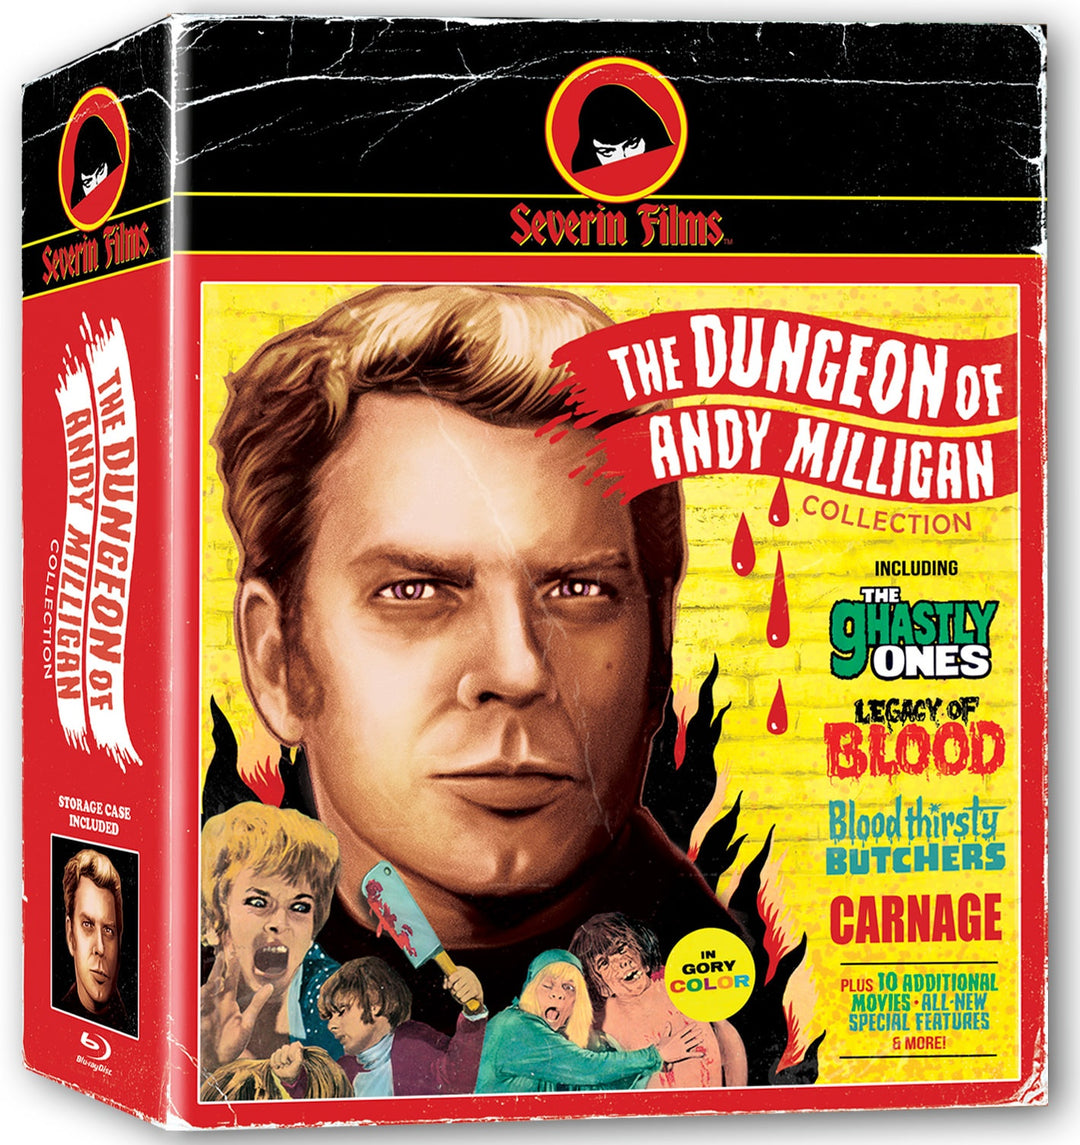 The Dungeon of Andy Milligan Collection [9-Disc Blu-ray Box Set]